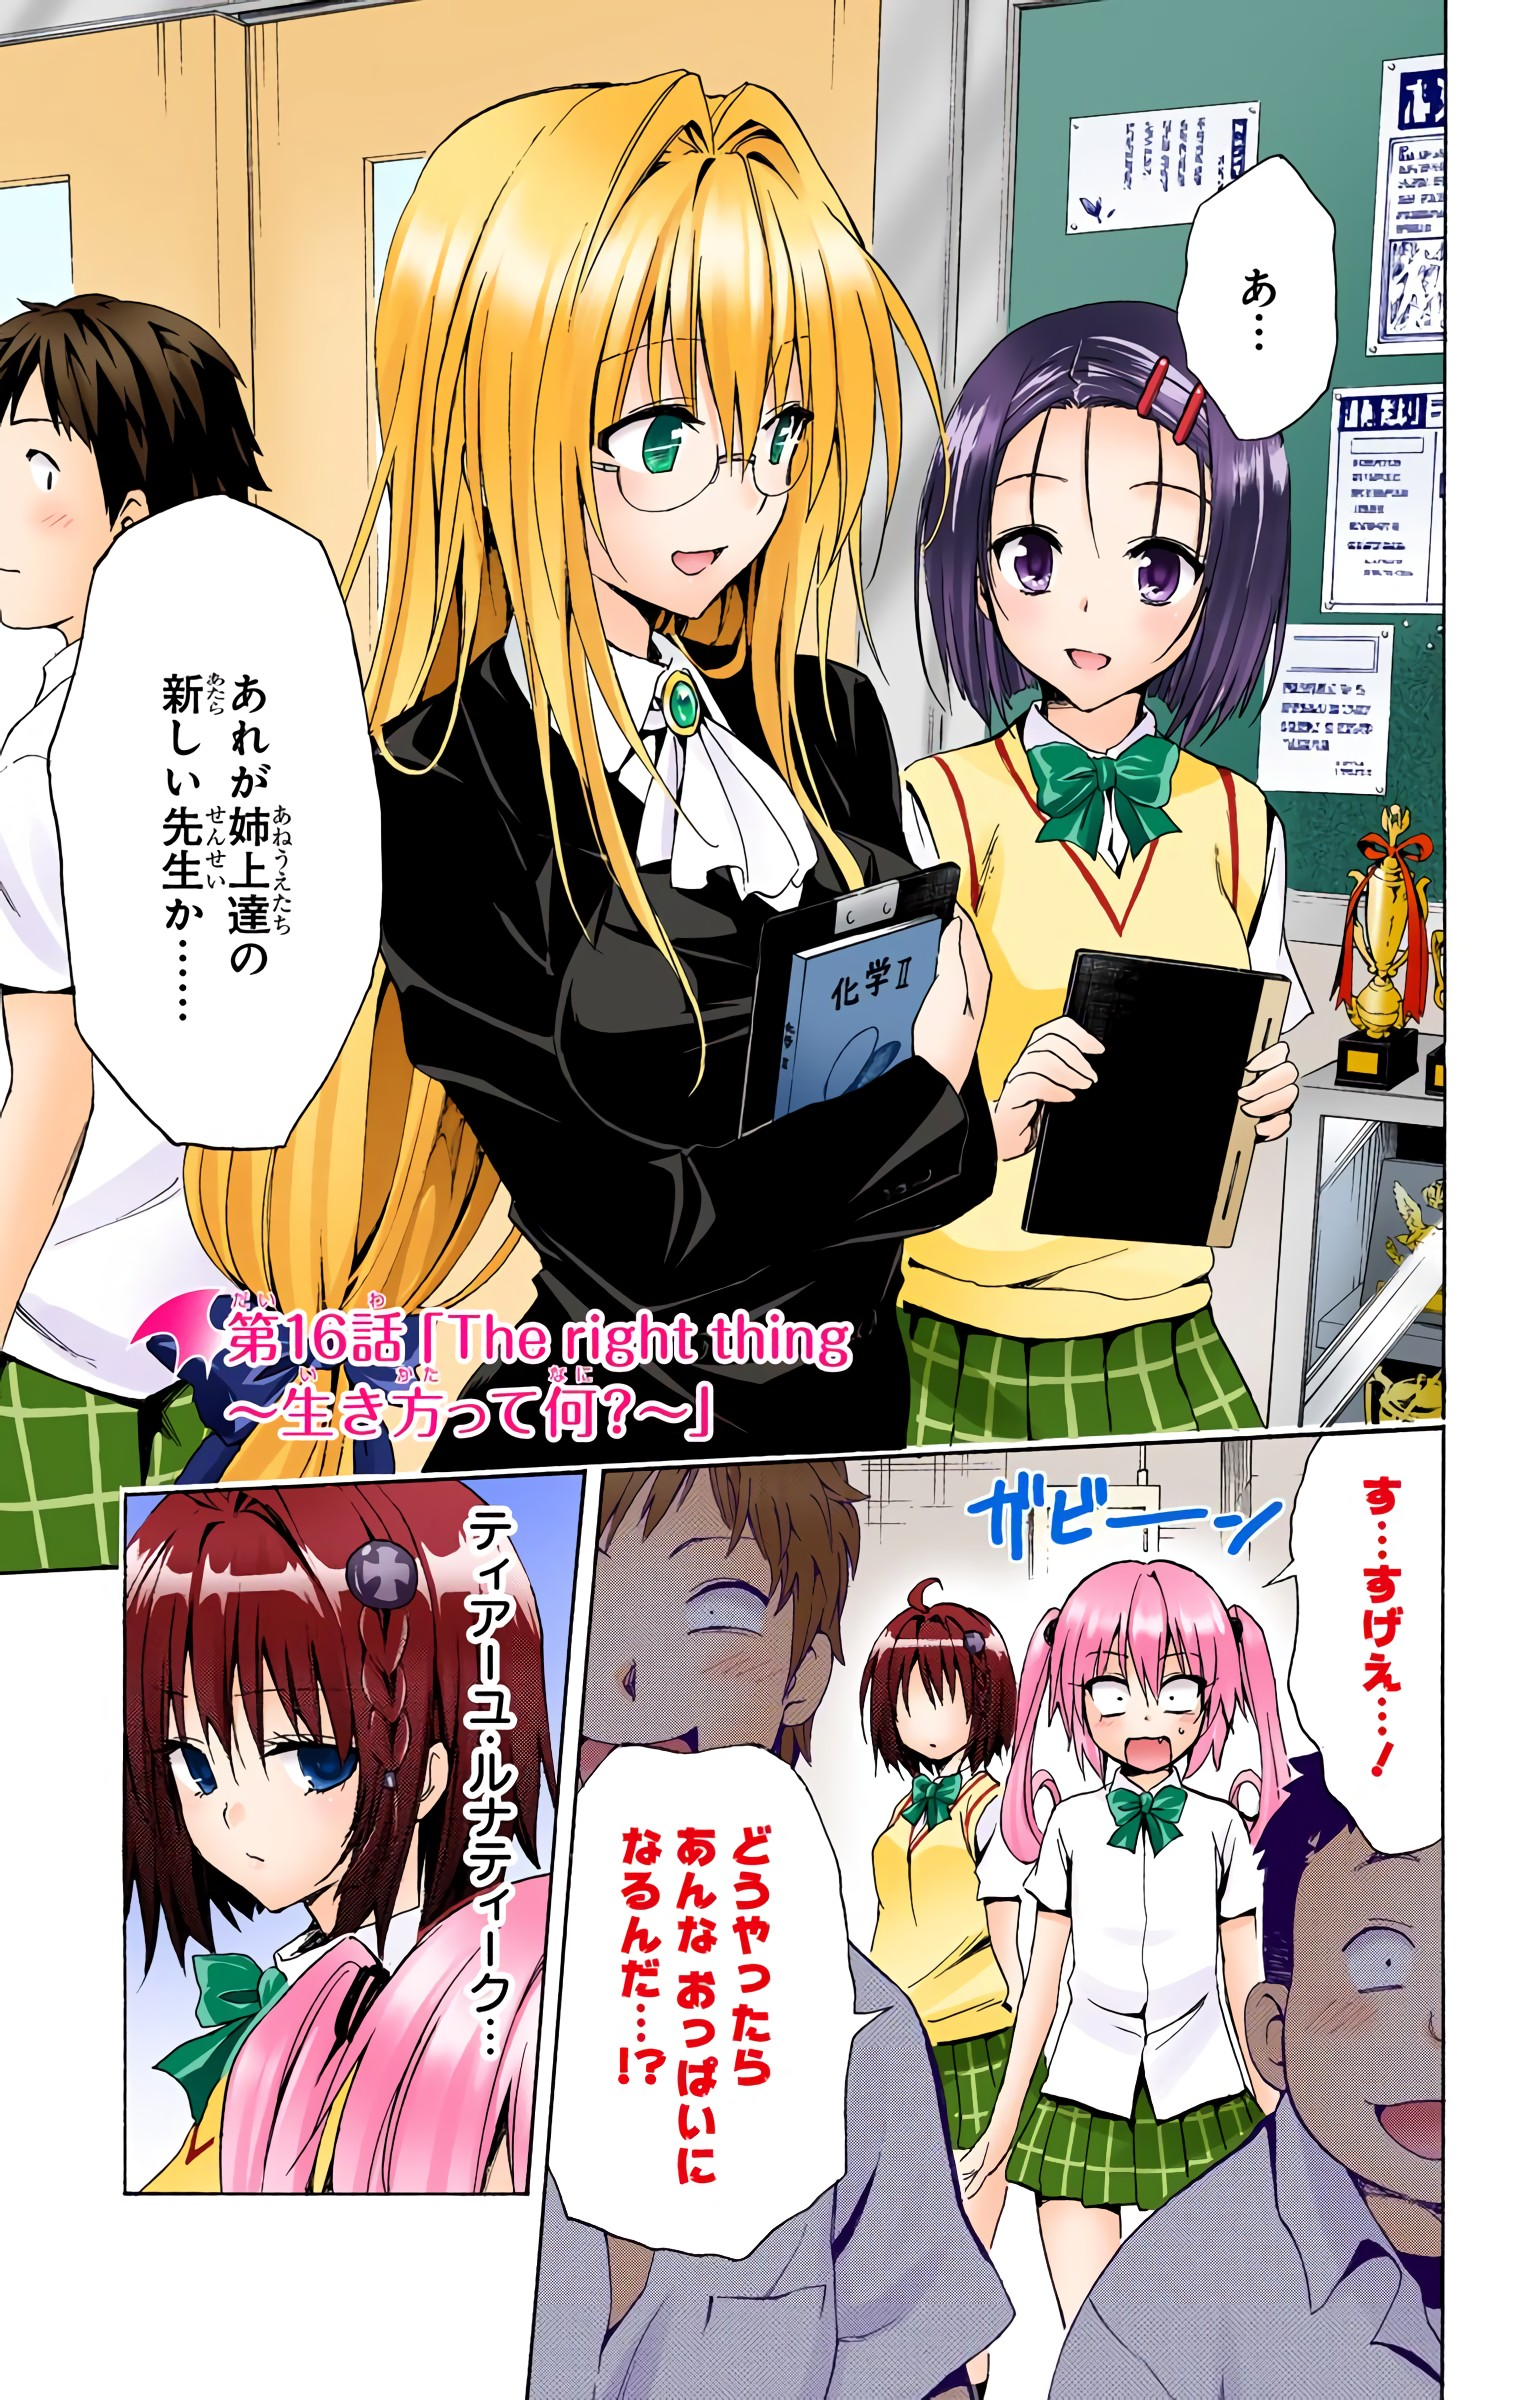 How To Watch To Love Ru In The Right Order 